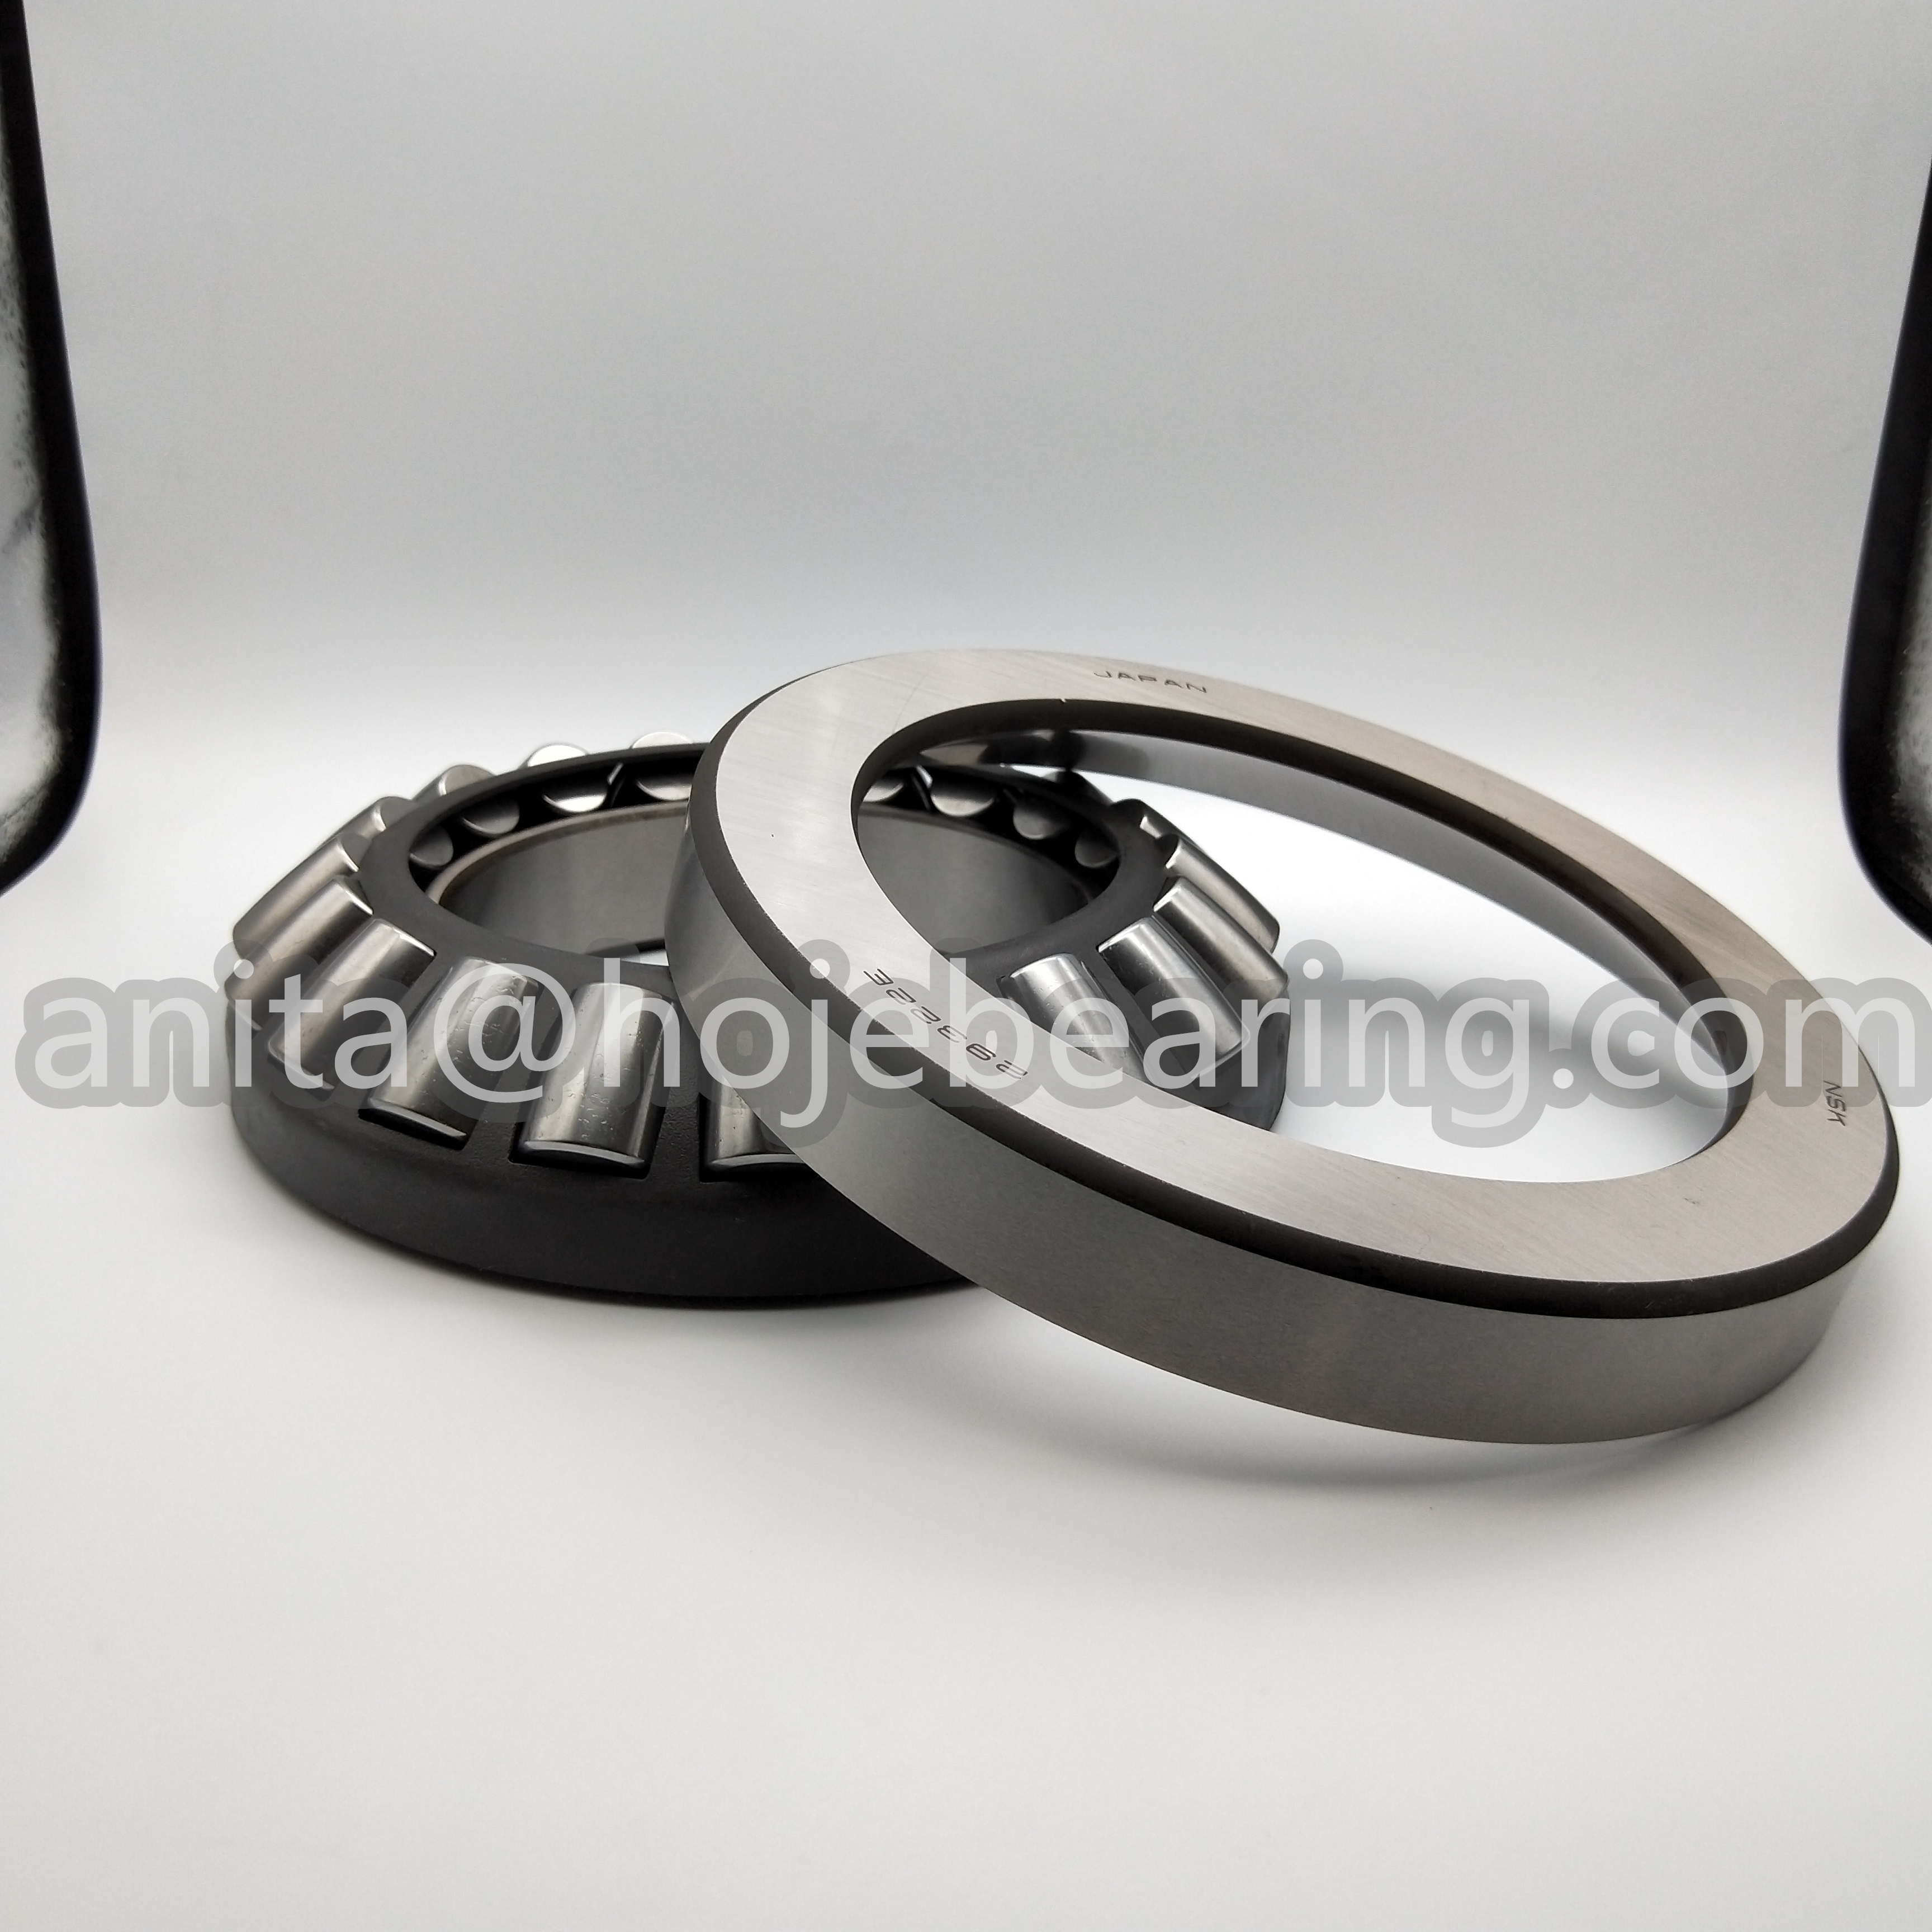 NSK 29322 E Spherical Roller Thrust Bearing - 110 mm Bore, 190 mm OD, 48 mm Width,Self Aligning; Not Banded; Steel Cage